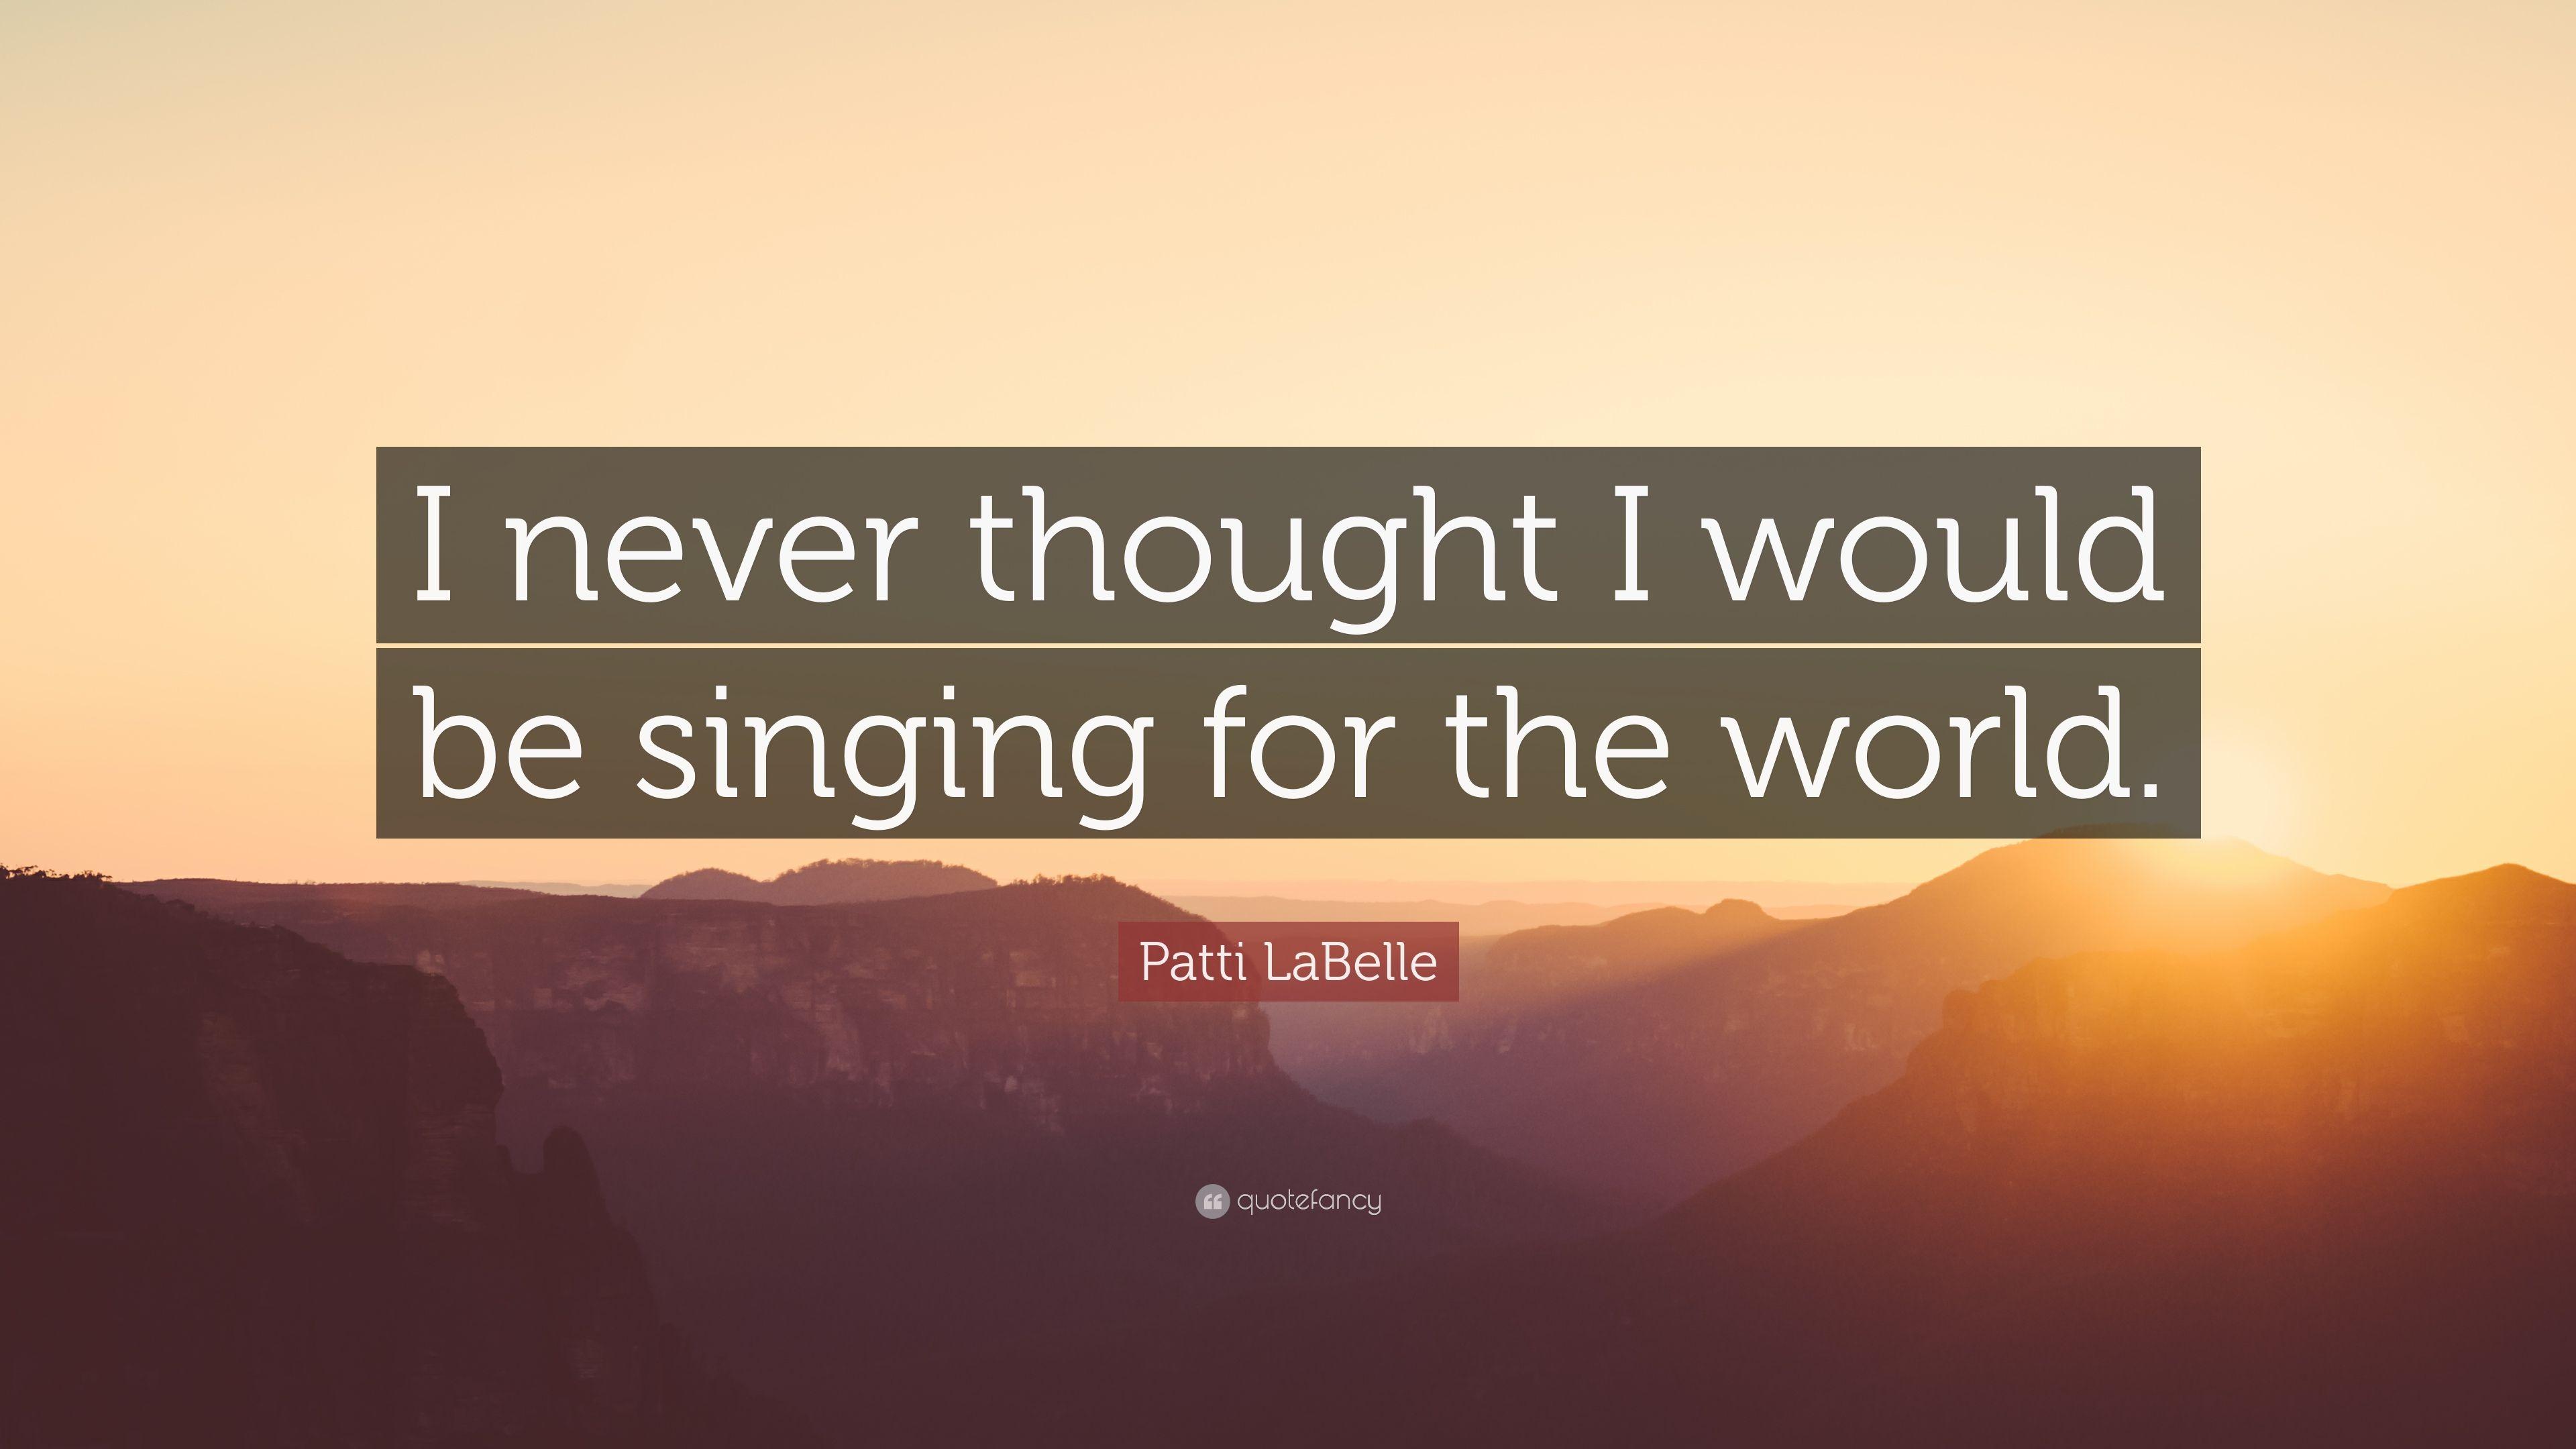 Patti LaBelle Quote: “I never thought I would be singing for